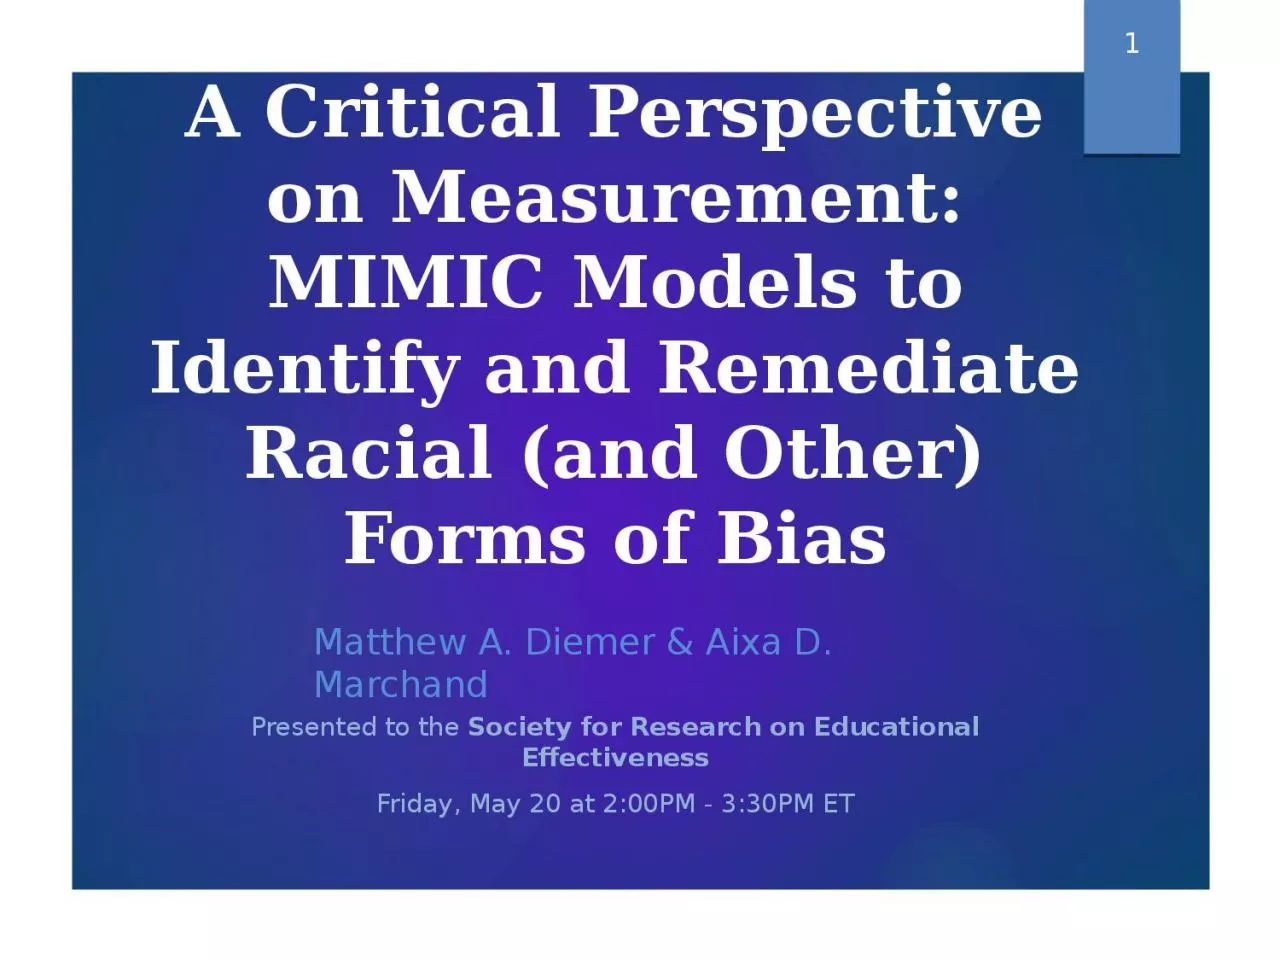 A Critical Perspective on Measurement: MIMIC Models to Identify and Remediate Racial (and